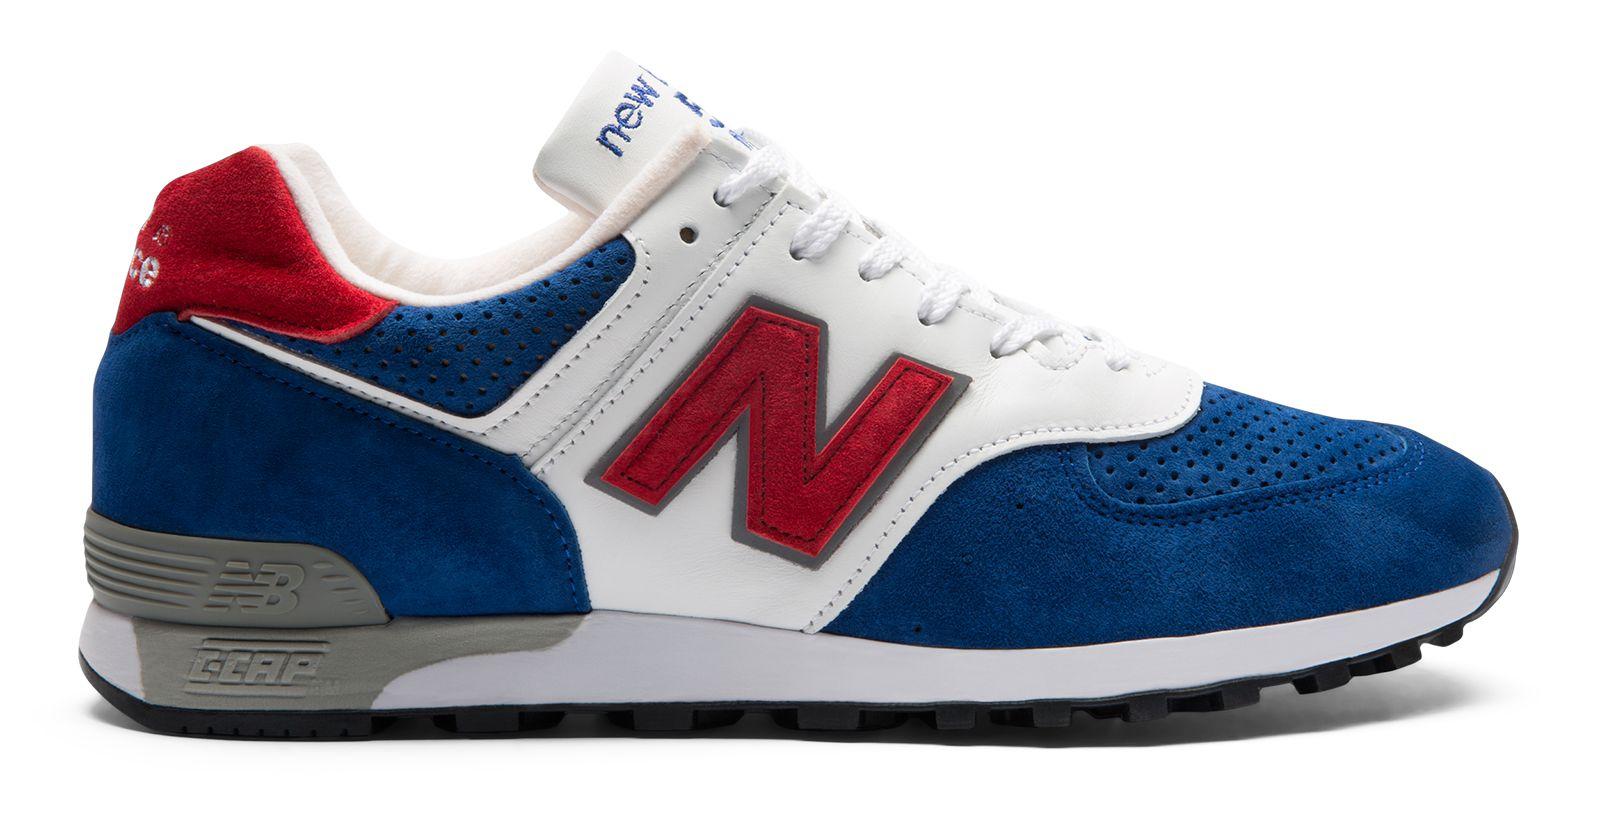 New Balance New Balance 576 Made In Uk Shoes in Red/Blue/White (Blue ...